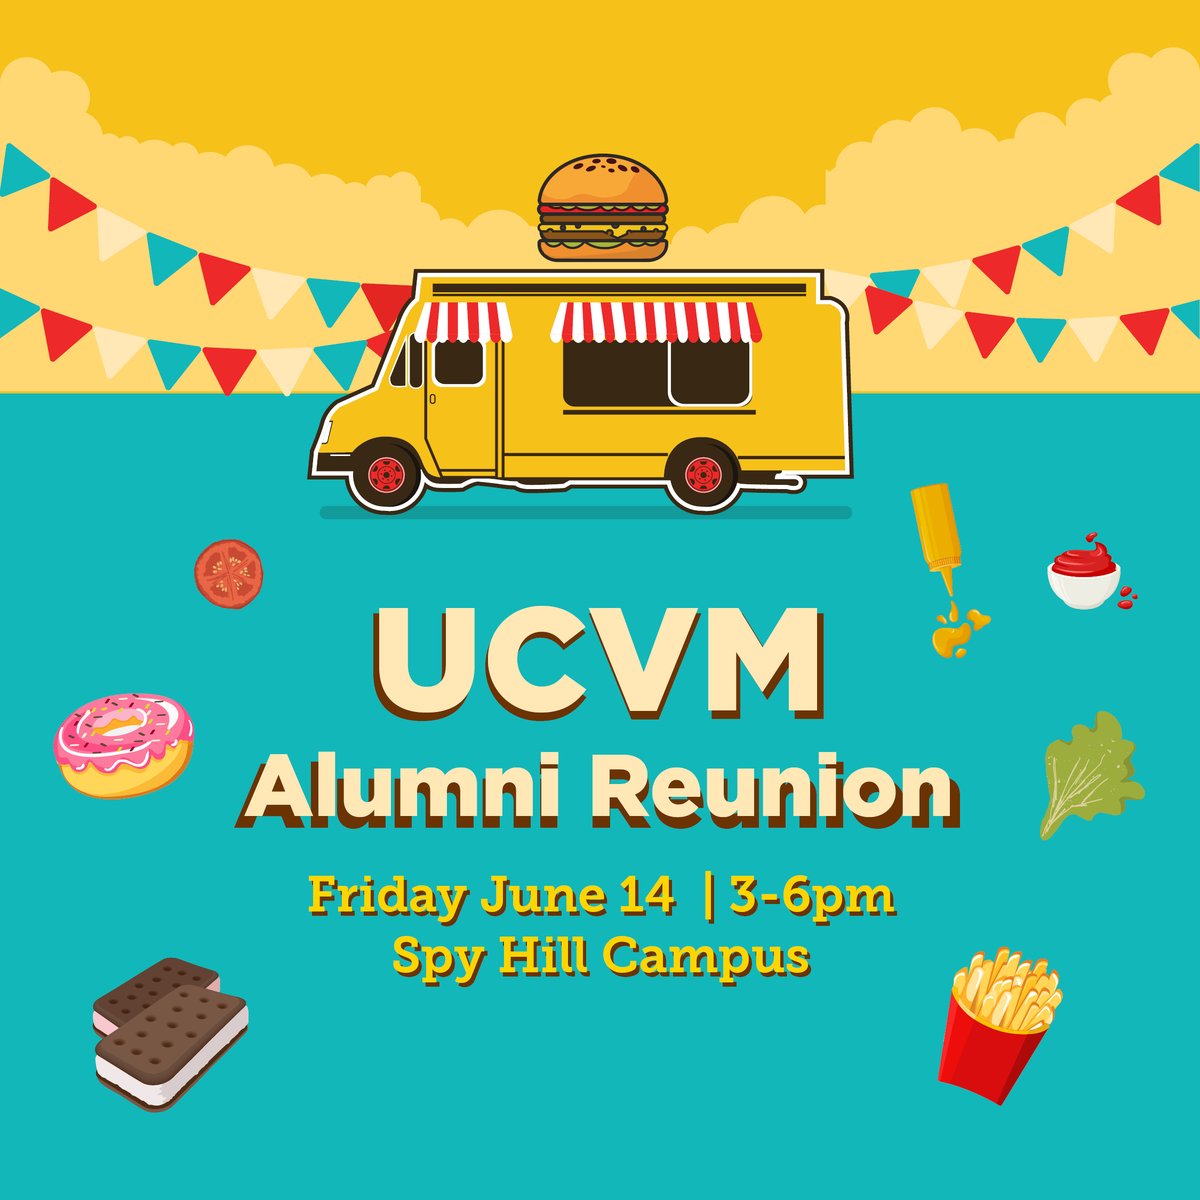 🎉 Calling ALL UCVM alumni and families!✨ Join us for the annual Alumni Reunion celebrating the 10th anniversary of the Class of 2014. Enjoy food trucks and a special gift. Plus, there's fun for the kids! RSVP link in your inbox or email us at ucvmevents@ucalgary.ca.